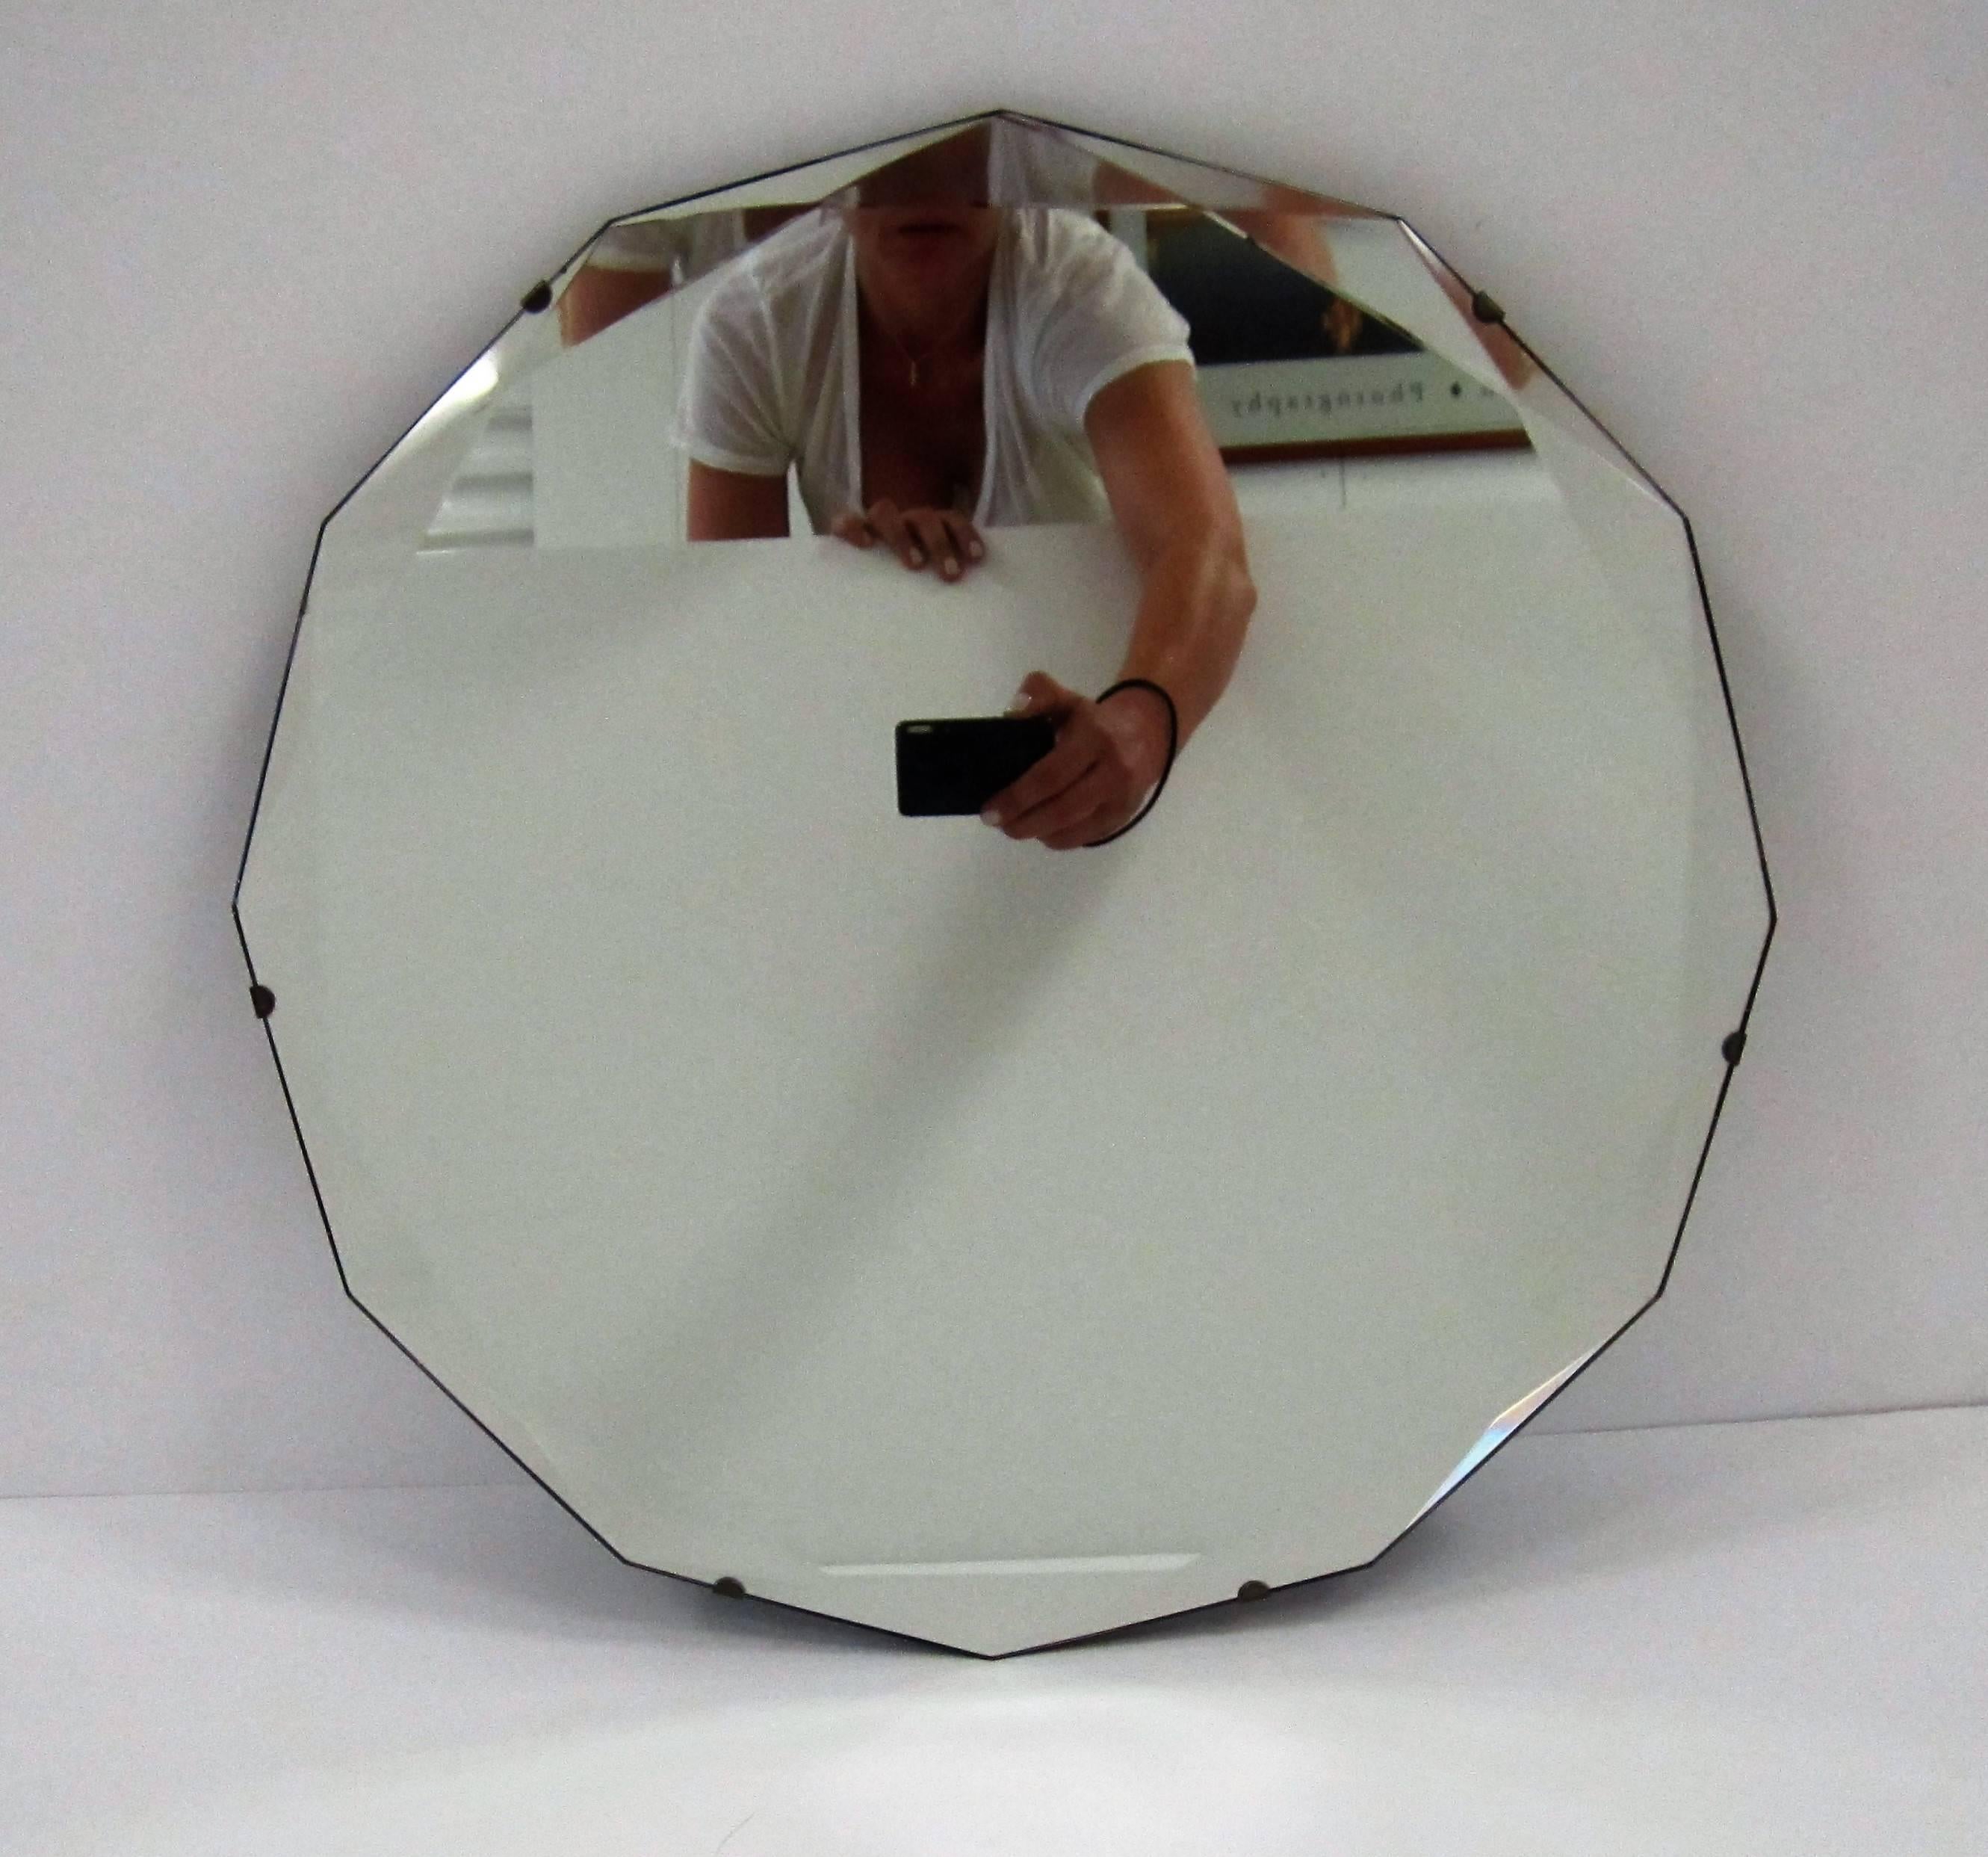 A beautiful vintage Hollywood Regency style 12 sided (dodecagon) beveled edge wall mirror. Beautiful intersecting bevel at each point (12) around mirror edge. Mirror would make a very nice vanity, dressing room, bath, etc., area mirror. 

Mirror is